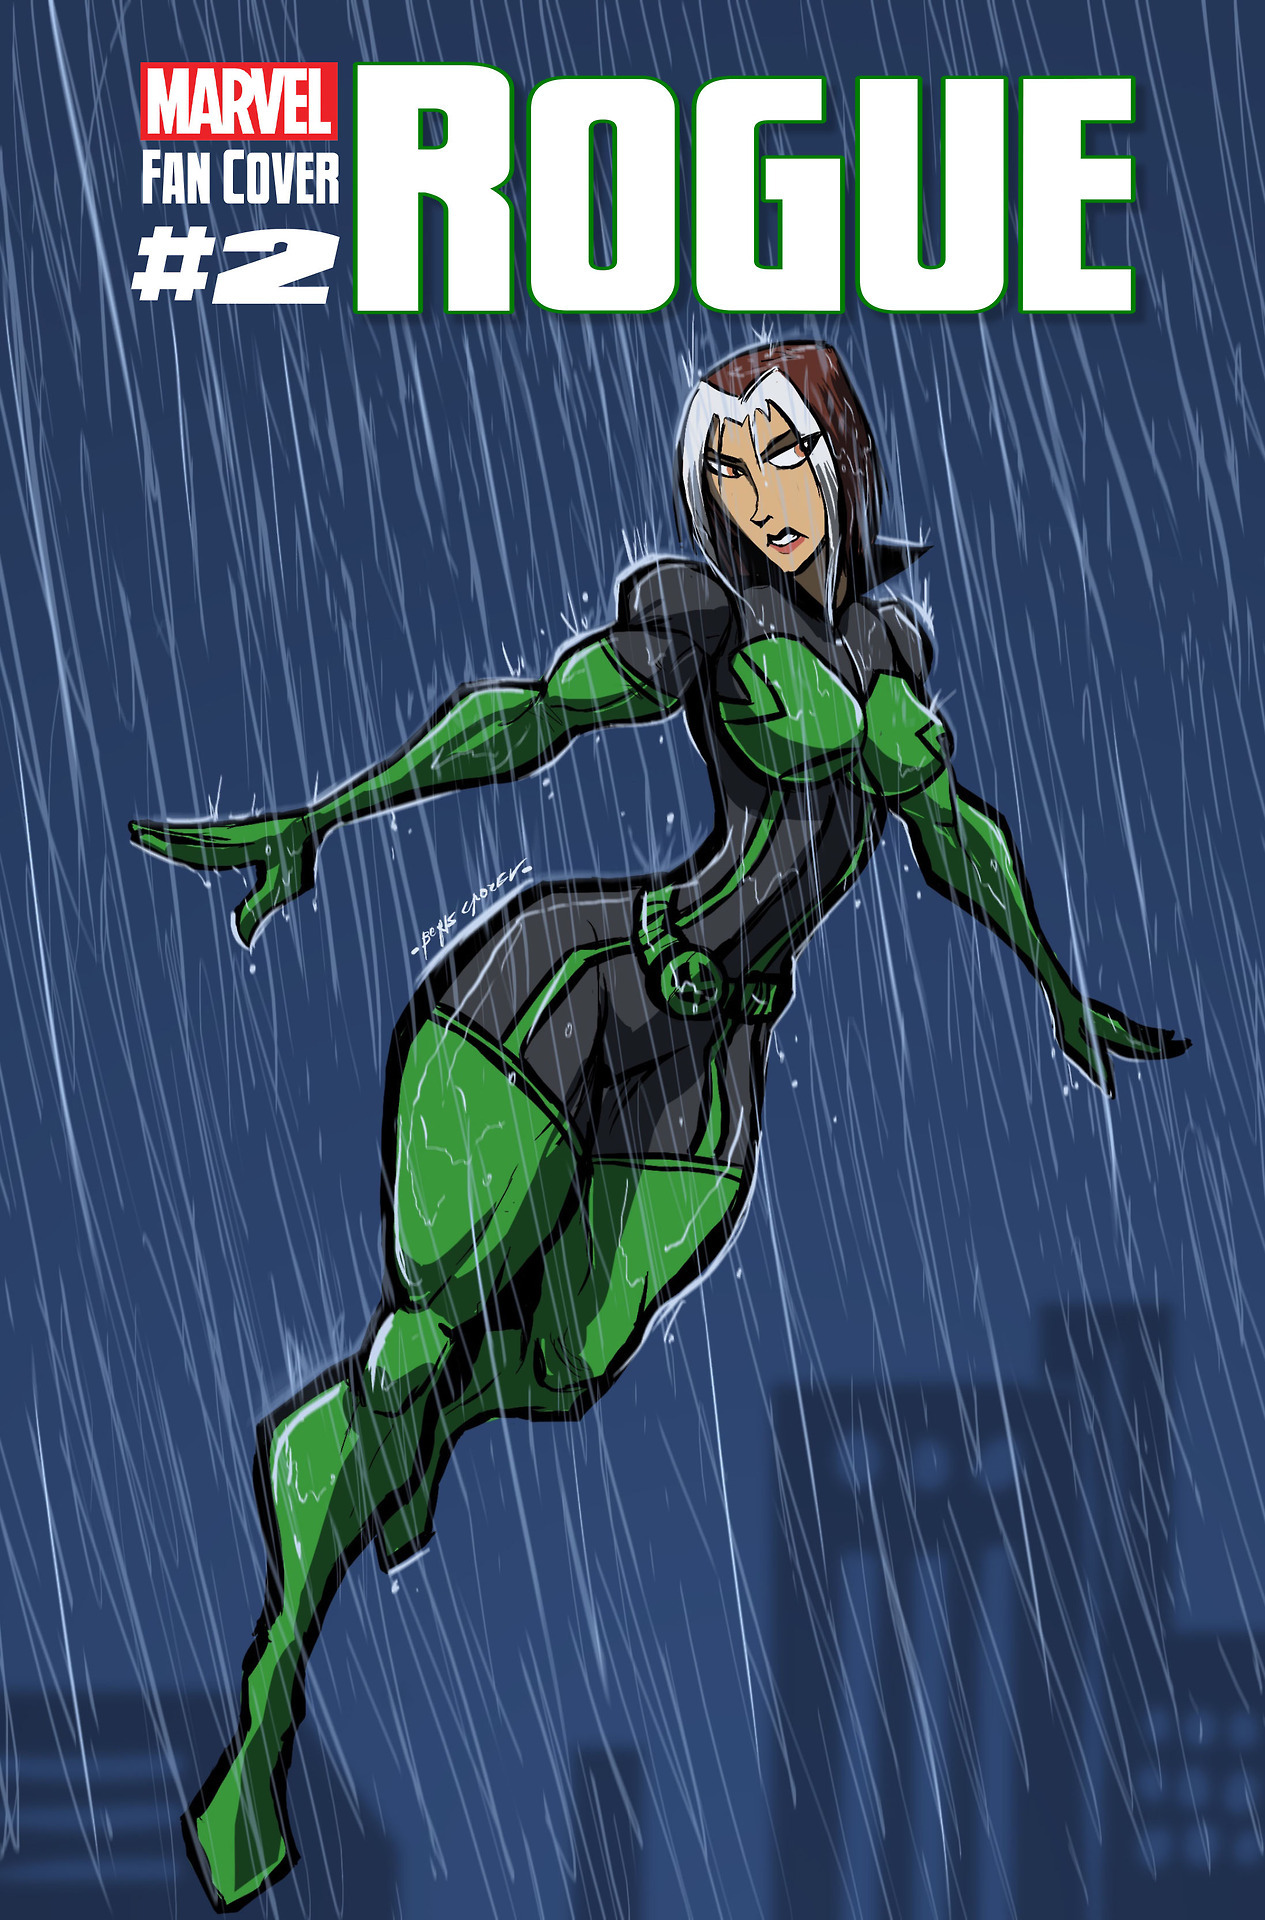 sabrerine911:Some Rogue fan covers I did some time ago.Had a lot of fun with these.May